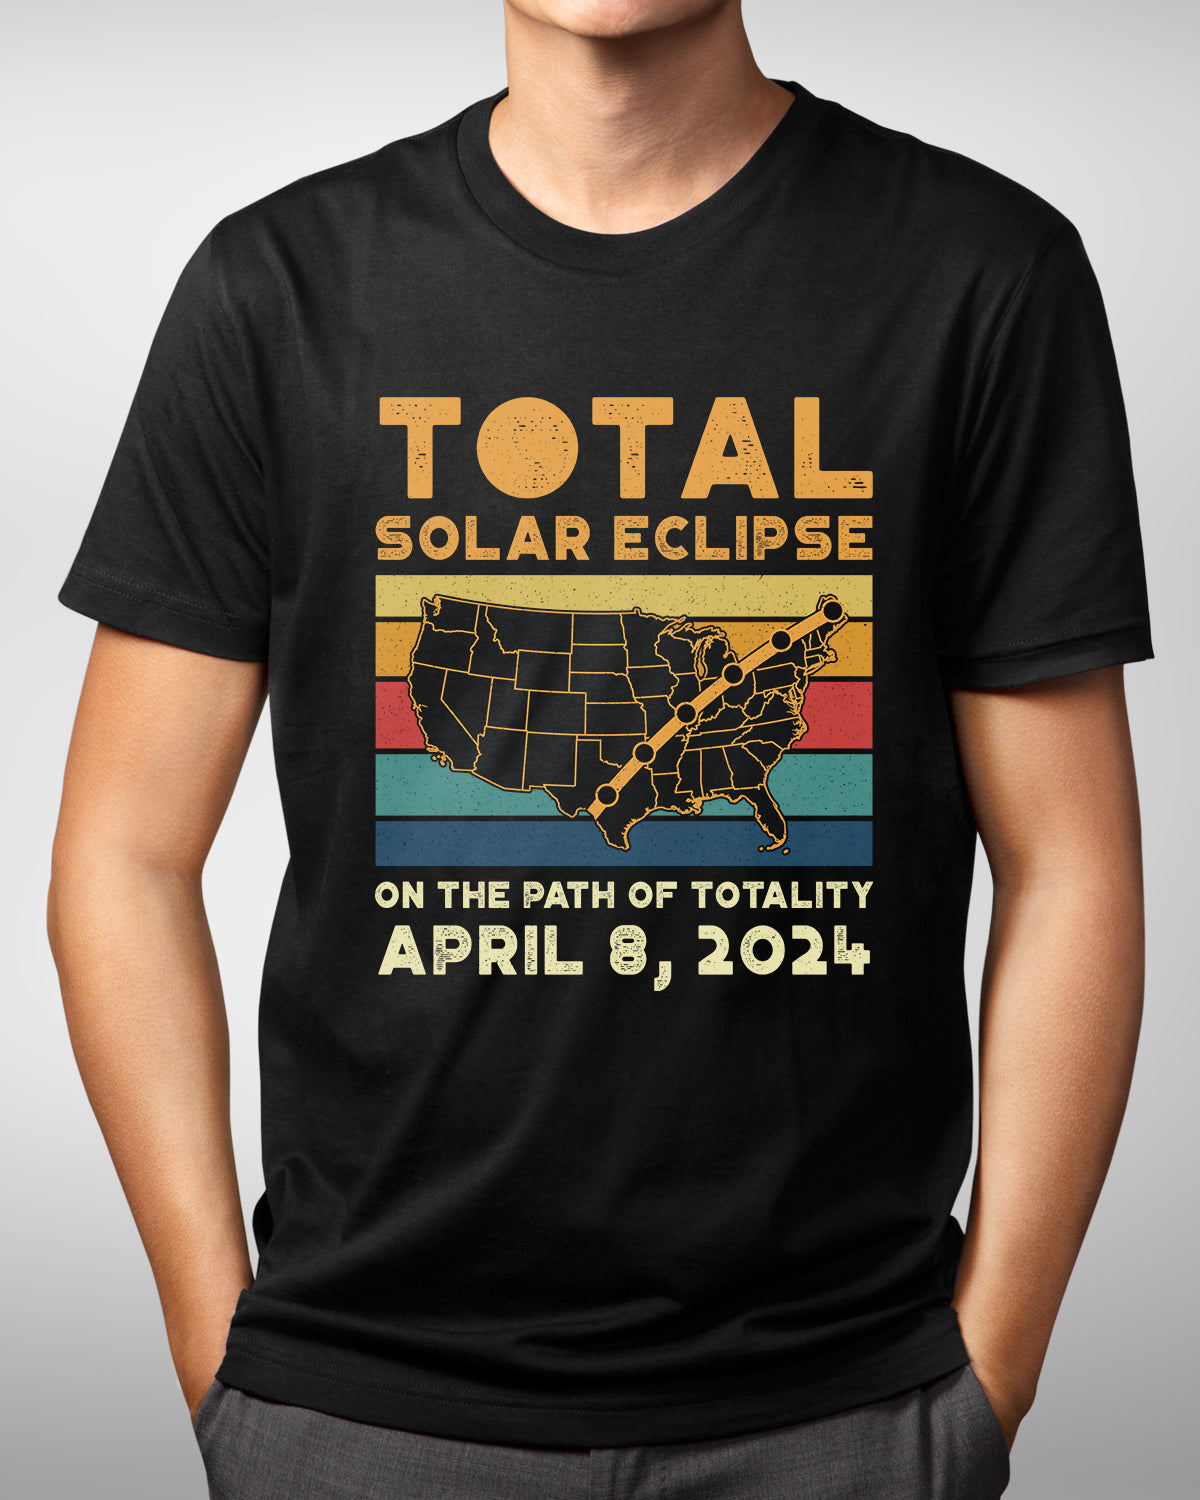 April 8, 2024 Total Solar Eclipse Shirt, Vintage USA Path of Totality